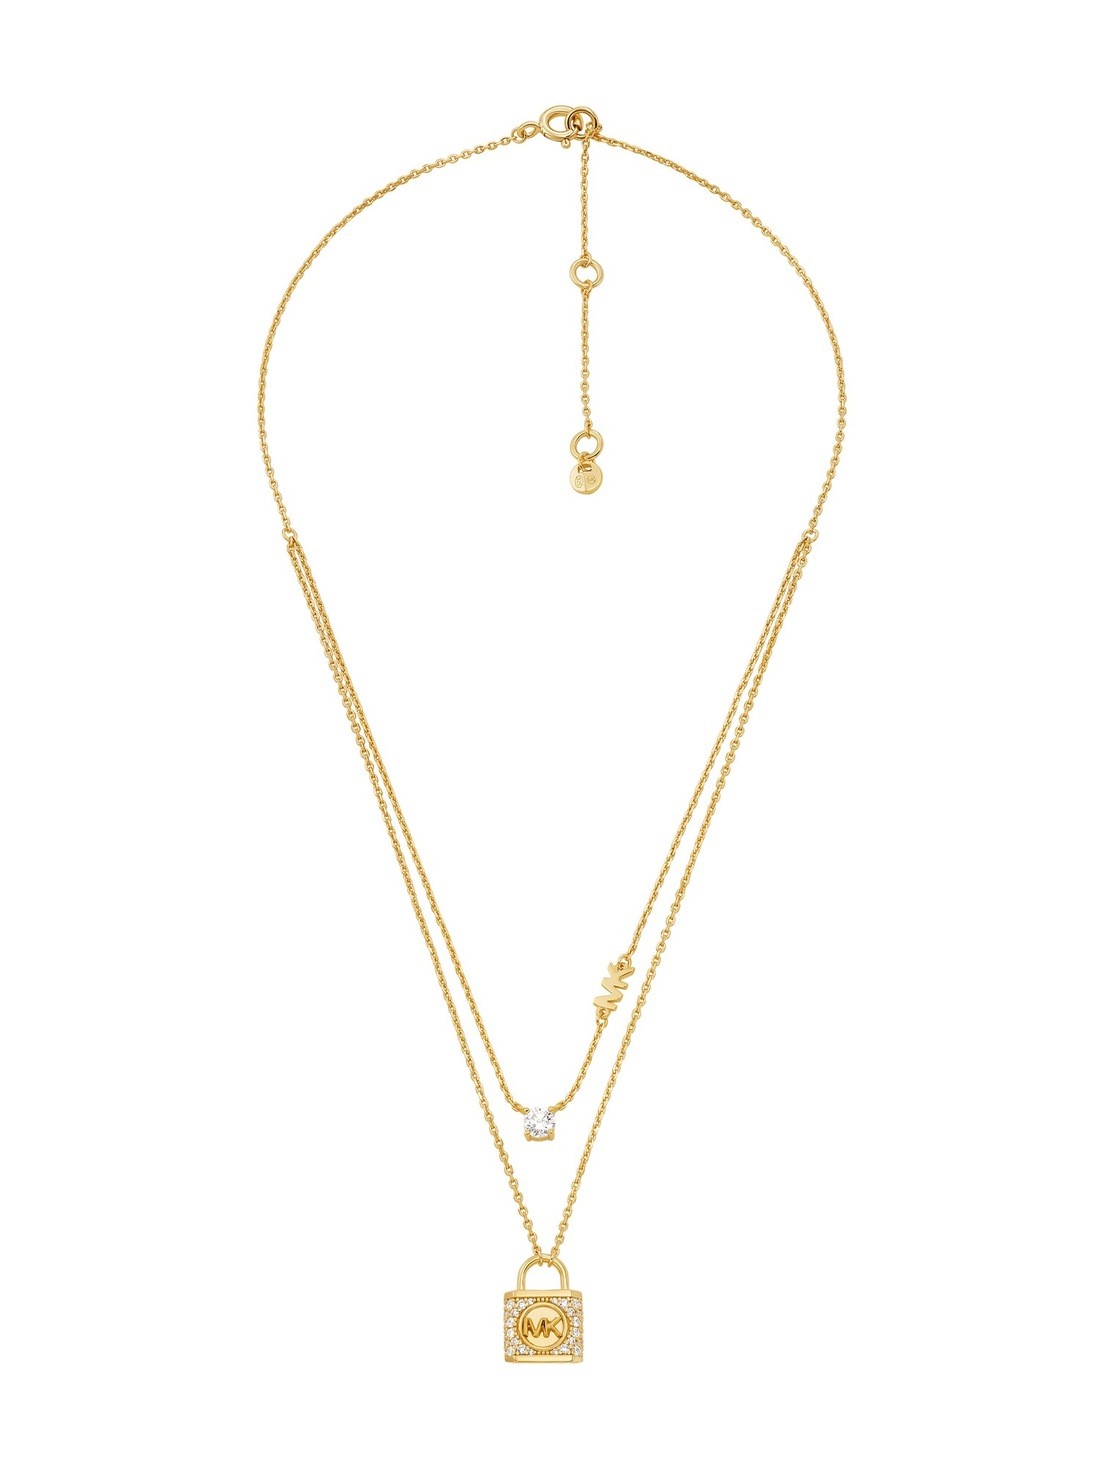 Michael Kors 14K Gold-Plated Sterling Silver Lock Lariat Necklace -  MKC1561AH710 - Watch Station